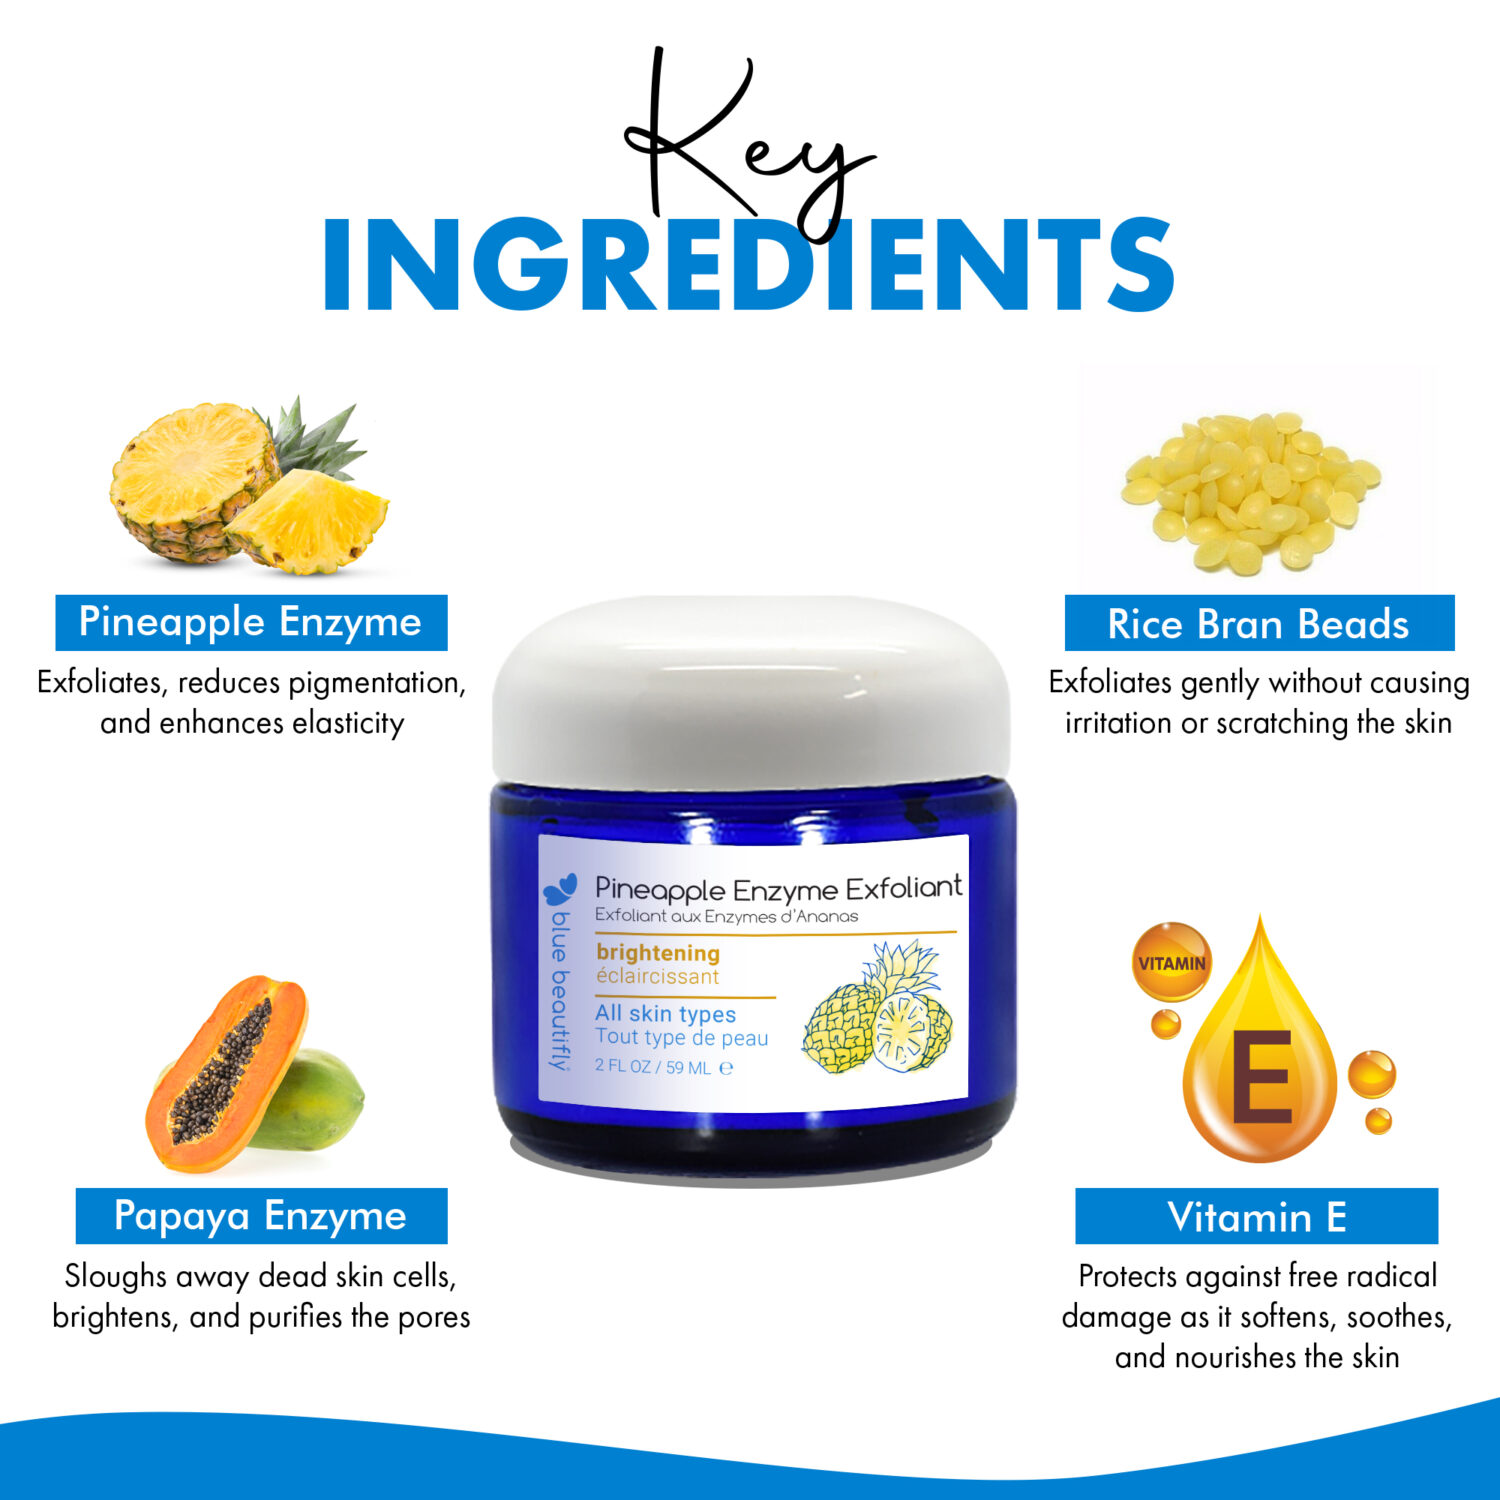 Blue Beautifly Pineapple Enzyme Exfoliant - Key ingredients are pineapple enzyme, rice bran beads, papaya enzyme, and vitamin E